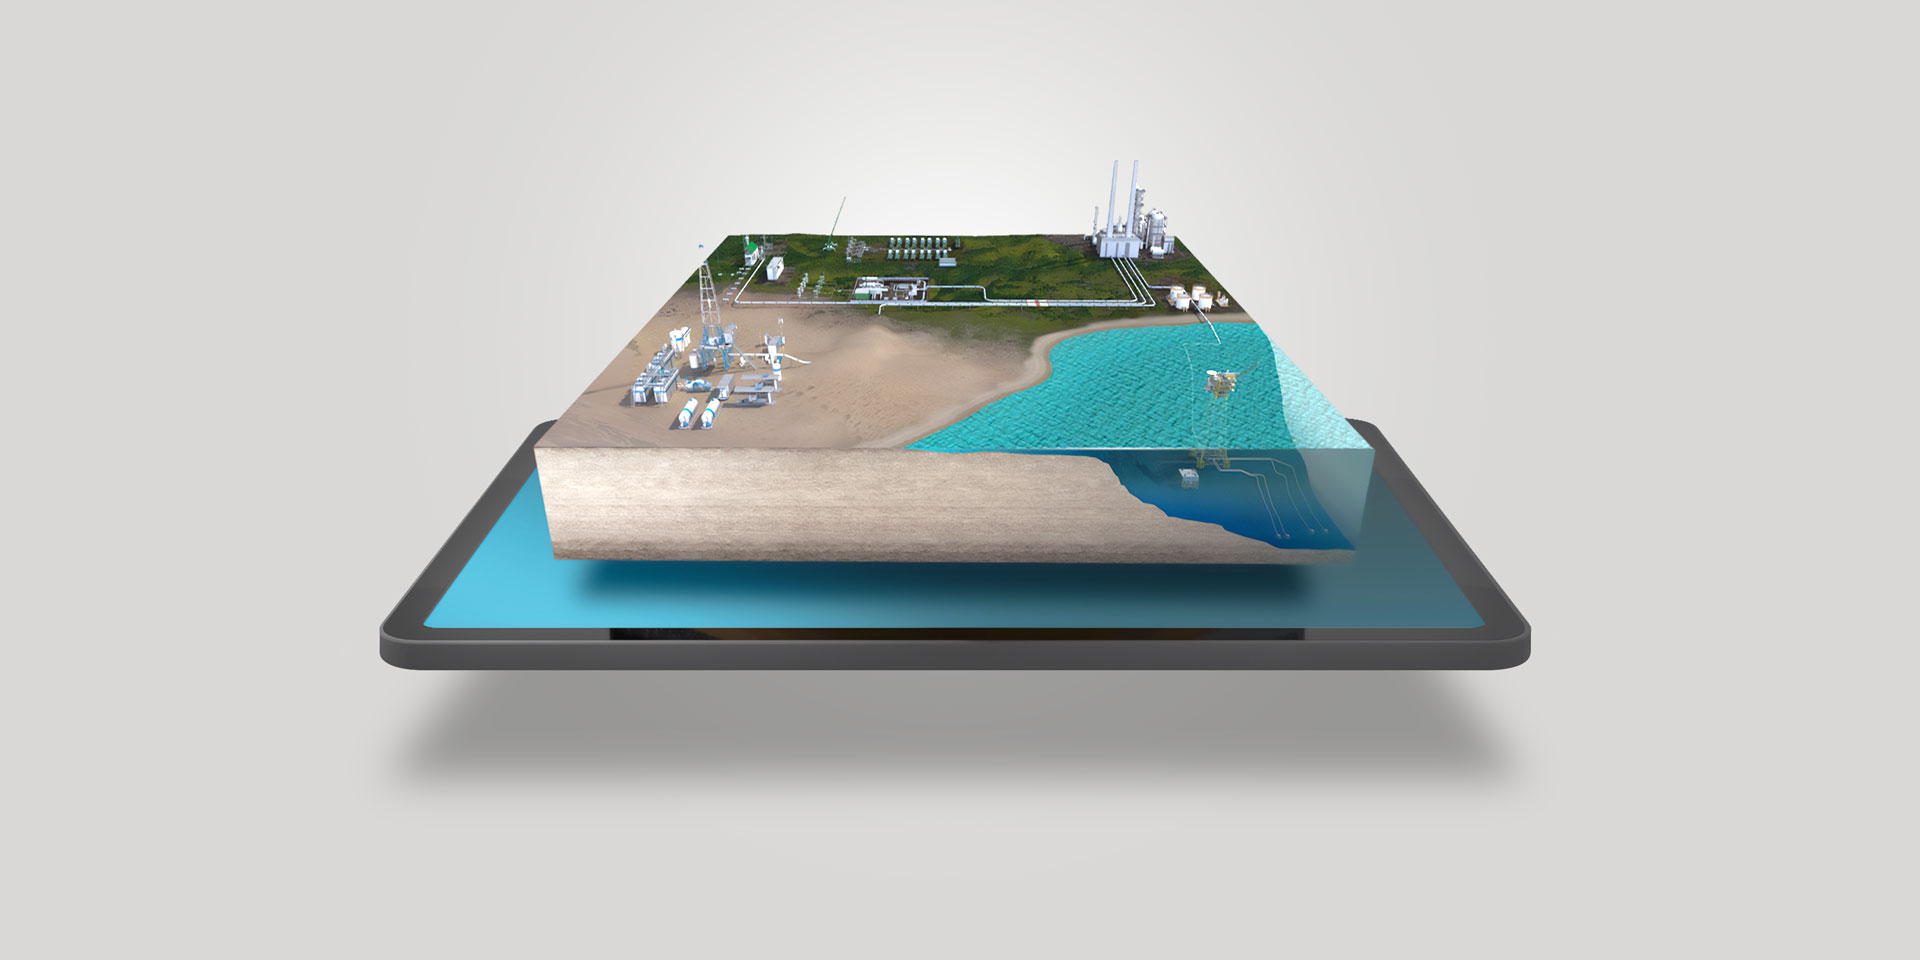 Interactive digital terrain that showcased an end-to-end snapshot of the energy life cycle